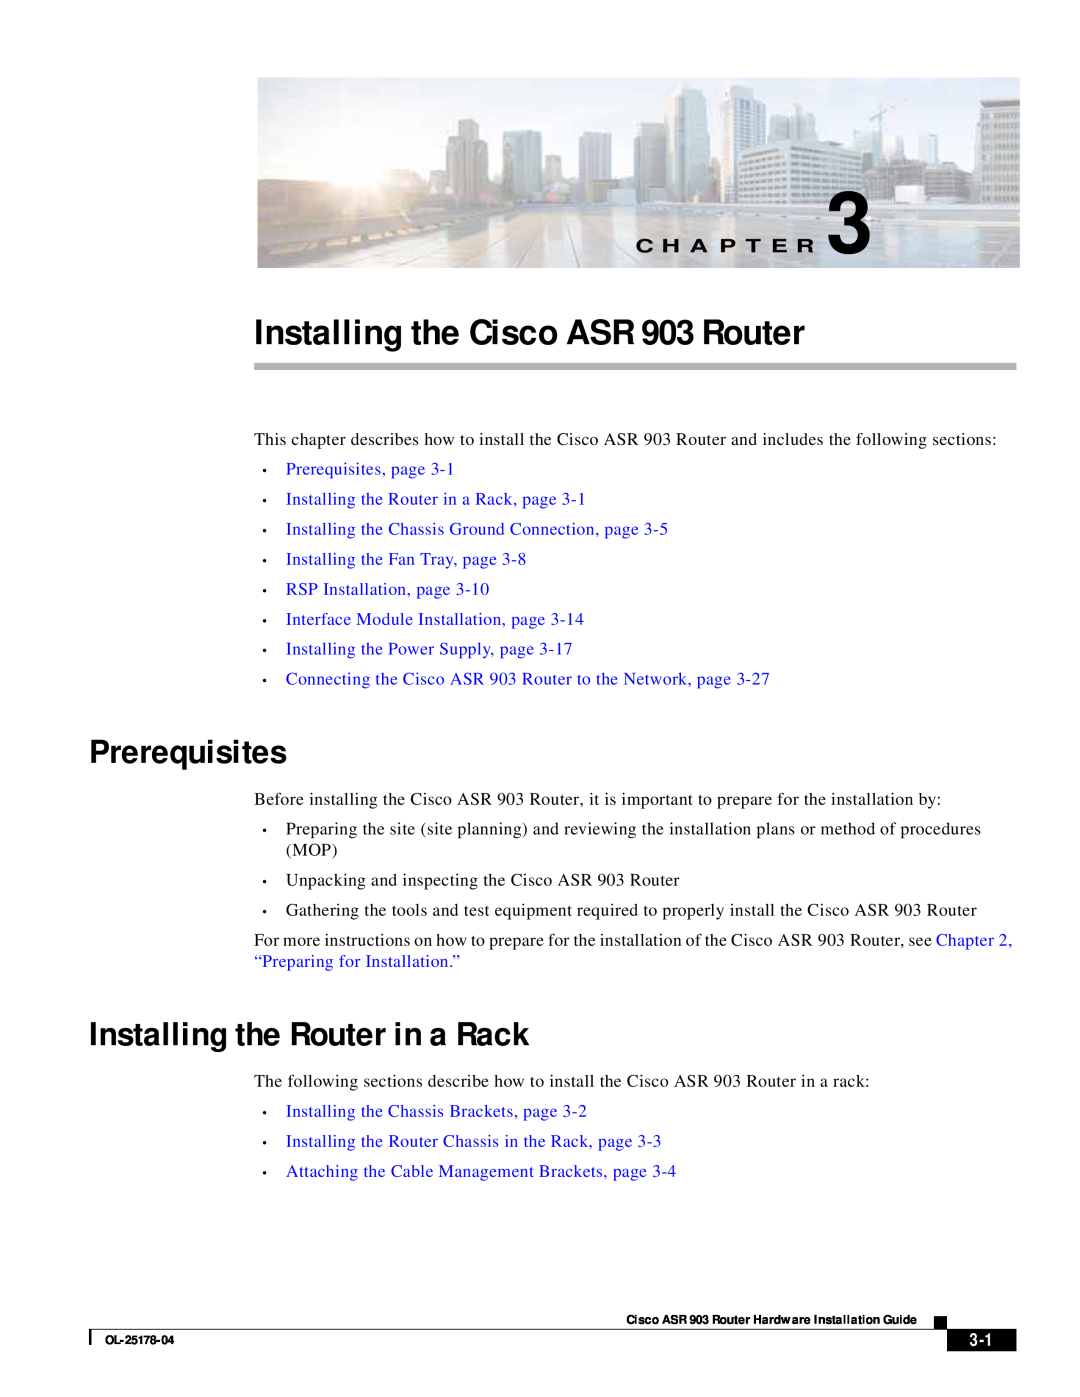 Cisco Systems manual Installing the Cisco ASR 903 Router, Prerequisites, Installing the Router in a Rack, C H A P T E R 